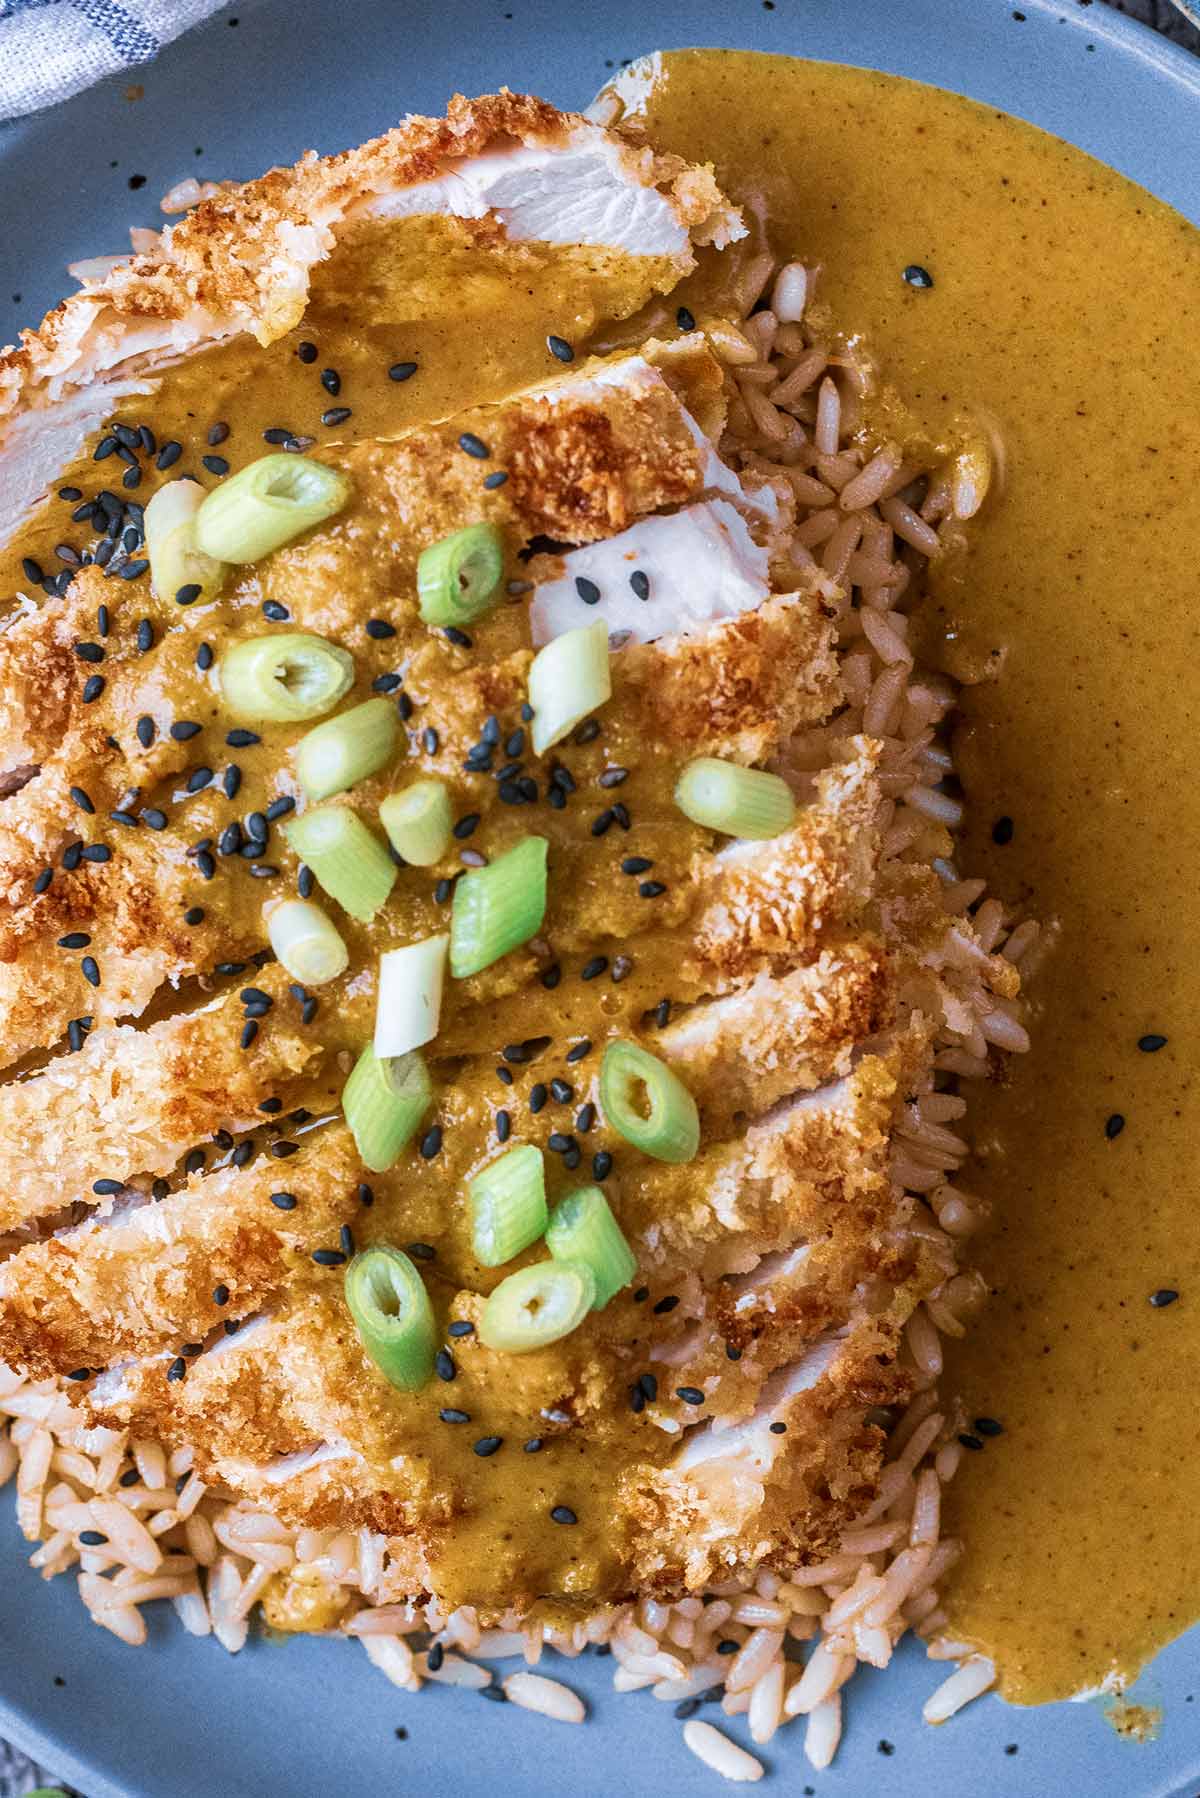 Sliced breaded chicken in a katsu sauce topped with sliced spring onions.